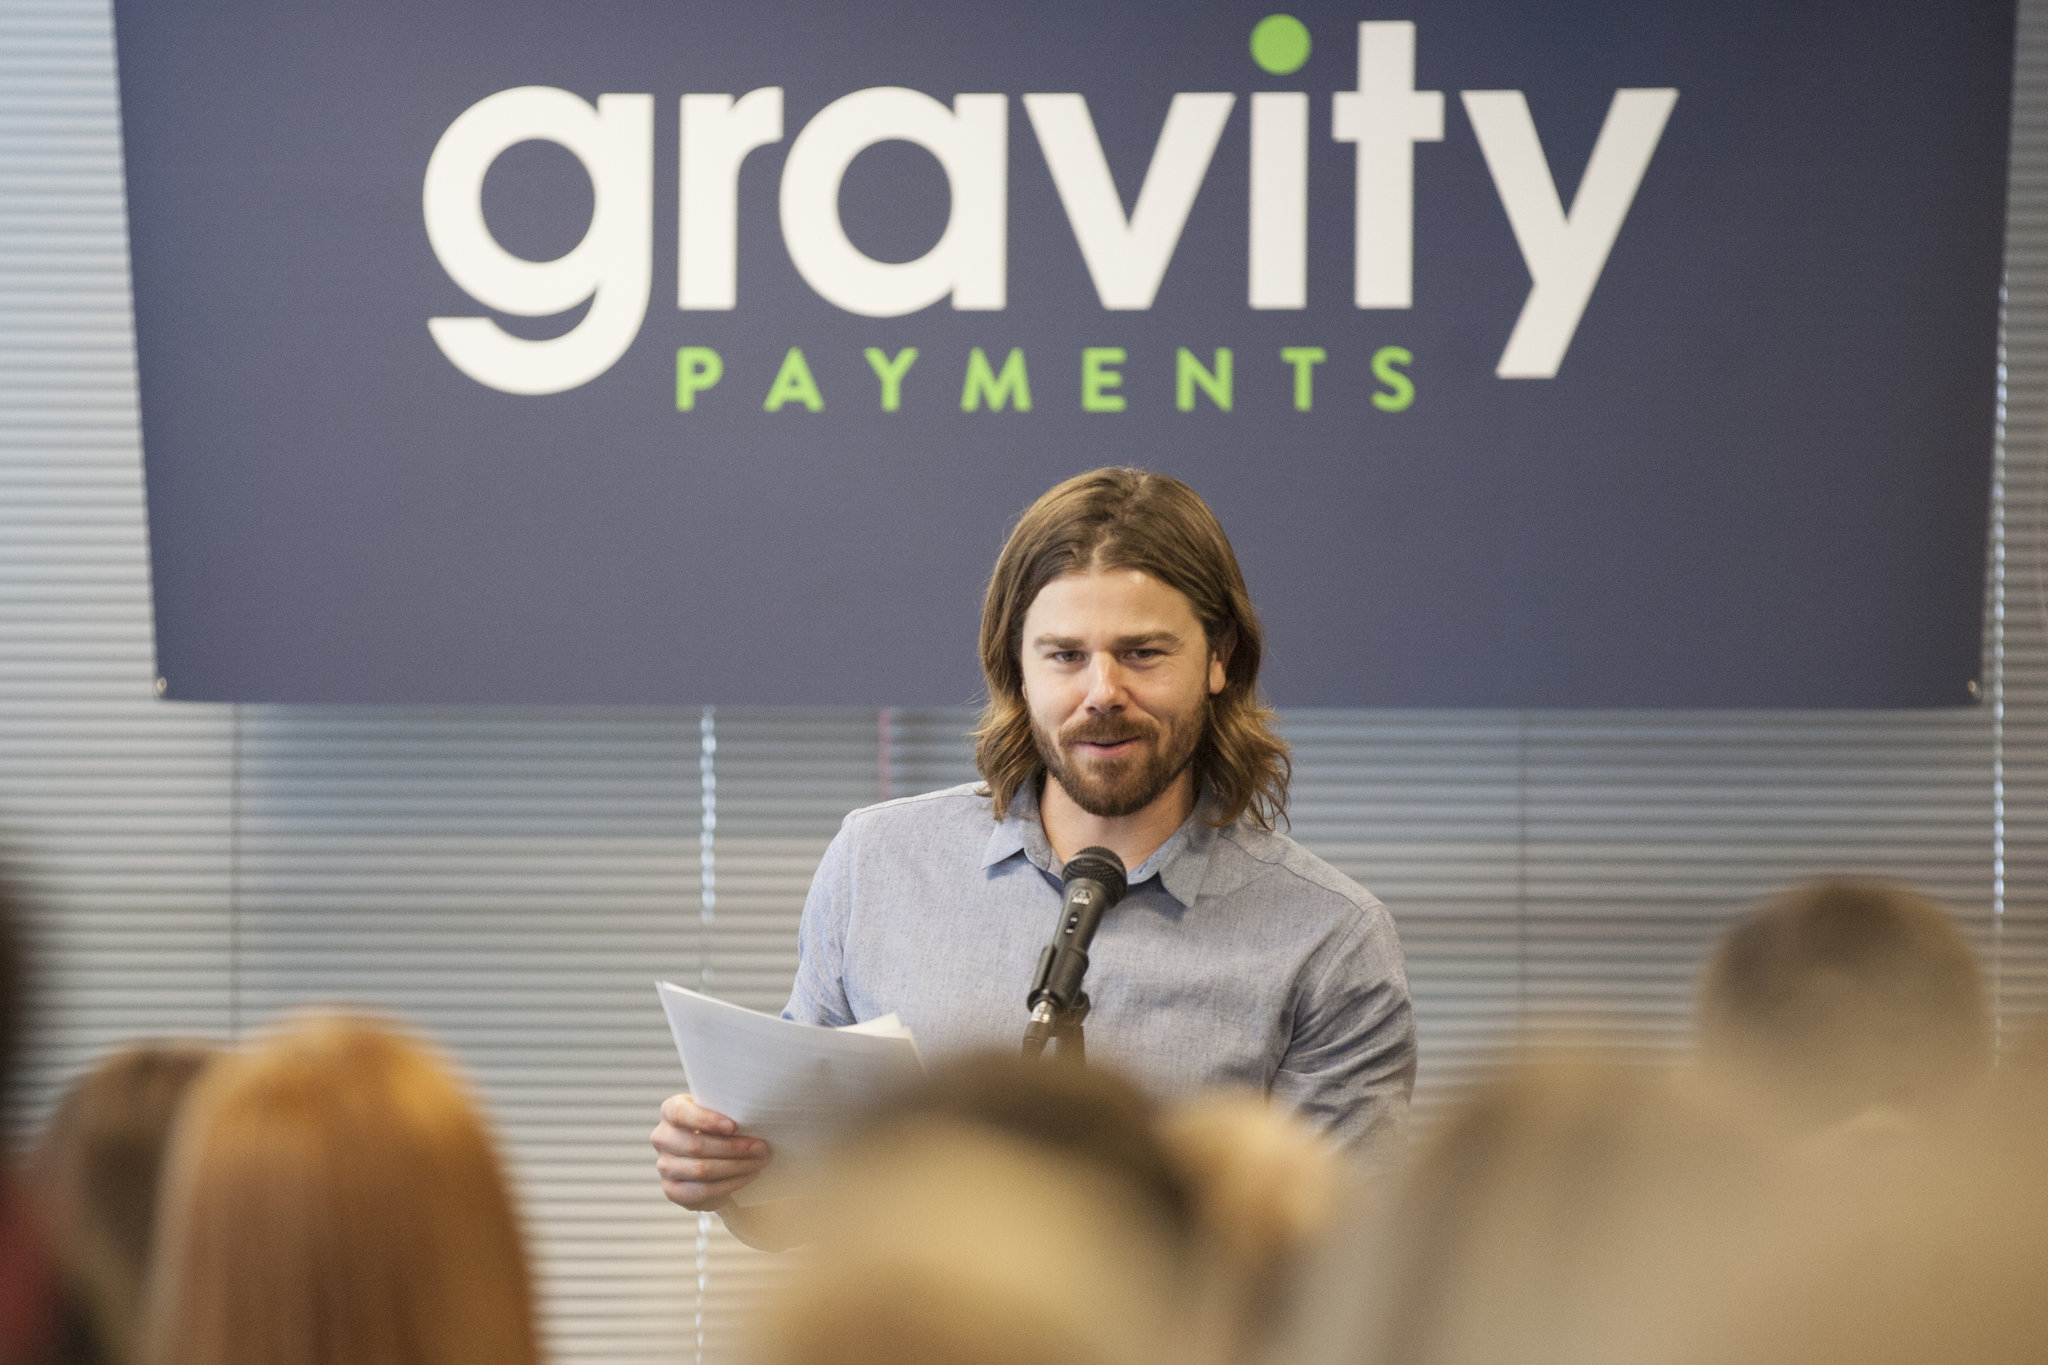 gravity payments